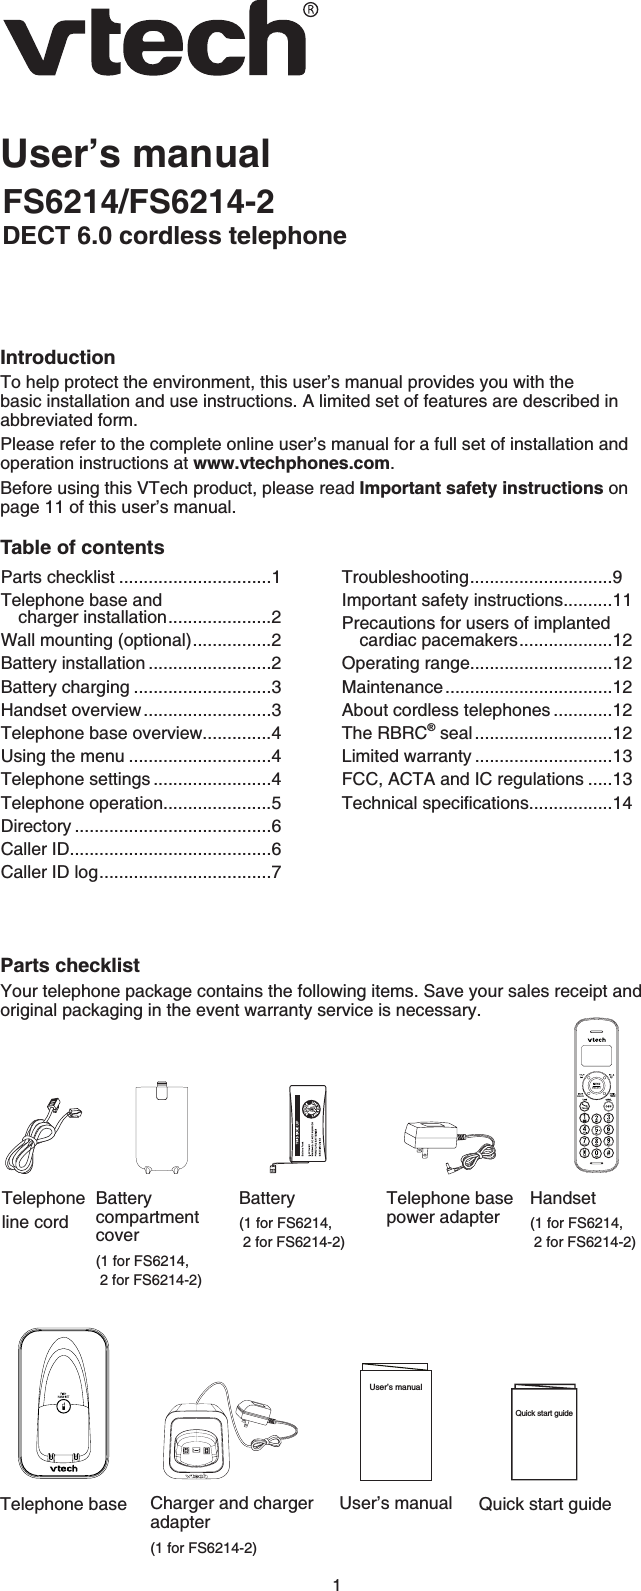 1User’s manualFS6214/FS6214-2DECT 6.0 cordless telephoneIntroductionTo help protect the environment, this user’s manual provides you with the basic installation and use instructions. A limited set of features are described in abbreviated form.Please refer to the complete online user’s manual for a full set of installation and operation instructions at www.vtechphones.com.Before using this VTech product, please read Important safety instructions on page 11 of this user’s manual.Table of contentsParts checklistYour telephone package contains the following items. Save your sales receipt and original packaging in the event warranty service is necessary.Parts checklist ...............................1Telephone base and charger installation.....................2Wall mounting (optional)................2Battery installation .........................2Battery charging ............................3Handset overview..........................3Telephone base overview..............4Using the menu .............................4Telephone settings ........................4Telephone operation......................5Directory ........................................6Caller ID.........................................6Caller ID log...................................7Troubleshooting.............................9Important safety instructions..........11Precautions for users of implanted cardiac pacemakers...................12Operating range.............................12Maintenance..................................12About cordless telephones ............12The RBRC® seal ............................12Limited warranty ............................13FCC, ACTA and IC regulations .....136GEJPKECNURGEKſECVKQPU.................14Battery(1 for FS6214,2 for FS6214-2)User’s manualUser’s manualTelephone base power adapterTelephoneline cordQuick start guideQuick start guideCharger and charger adapter(1 for FS6214-2)Batterycompartmentcover(1 for FS6214,2 for FS6214-2)Handset(1 for FS6214,2 for FS6214-2)Telephone base